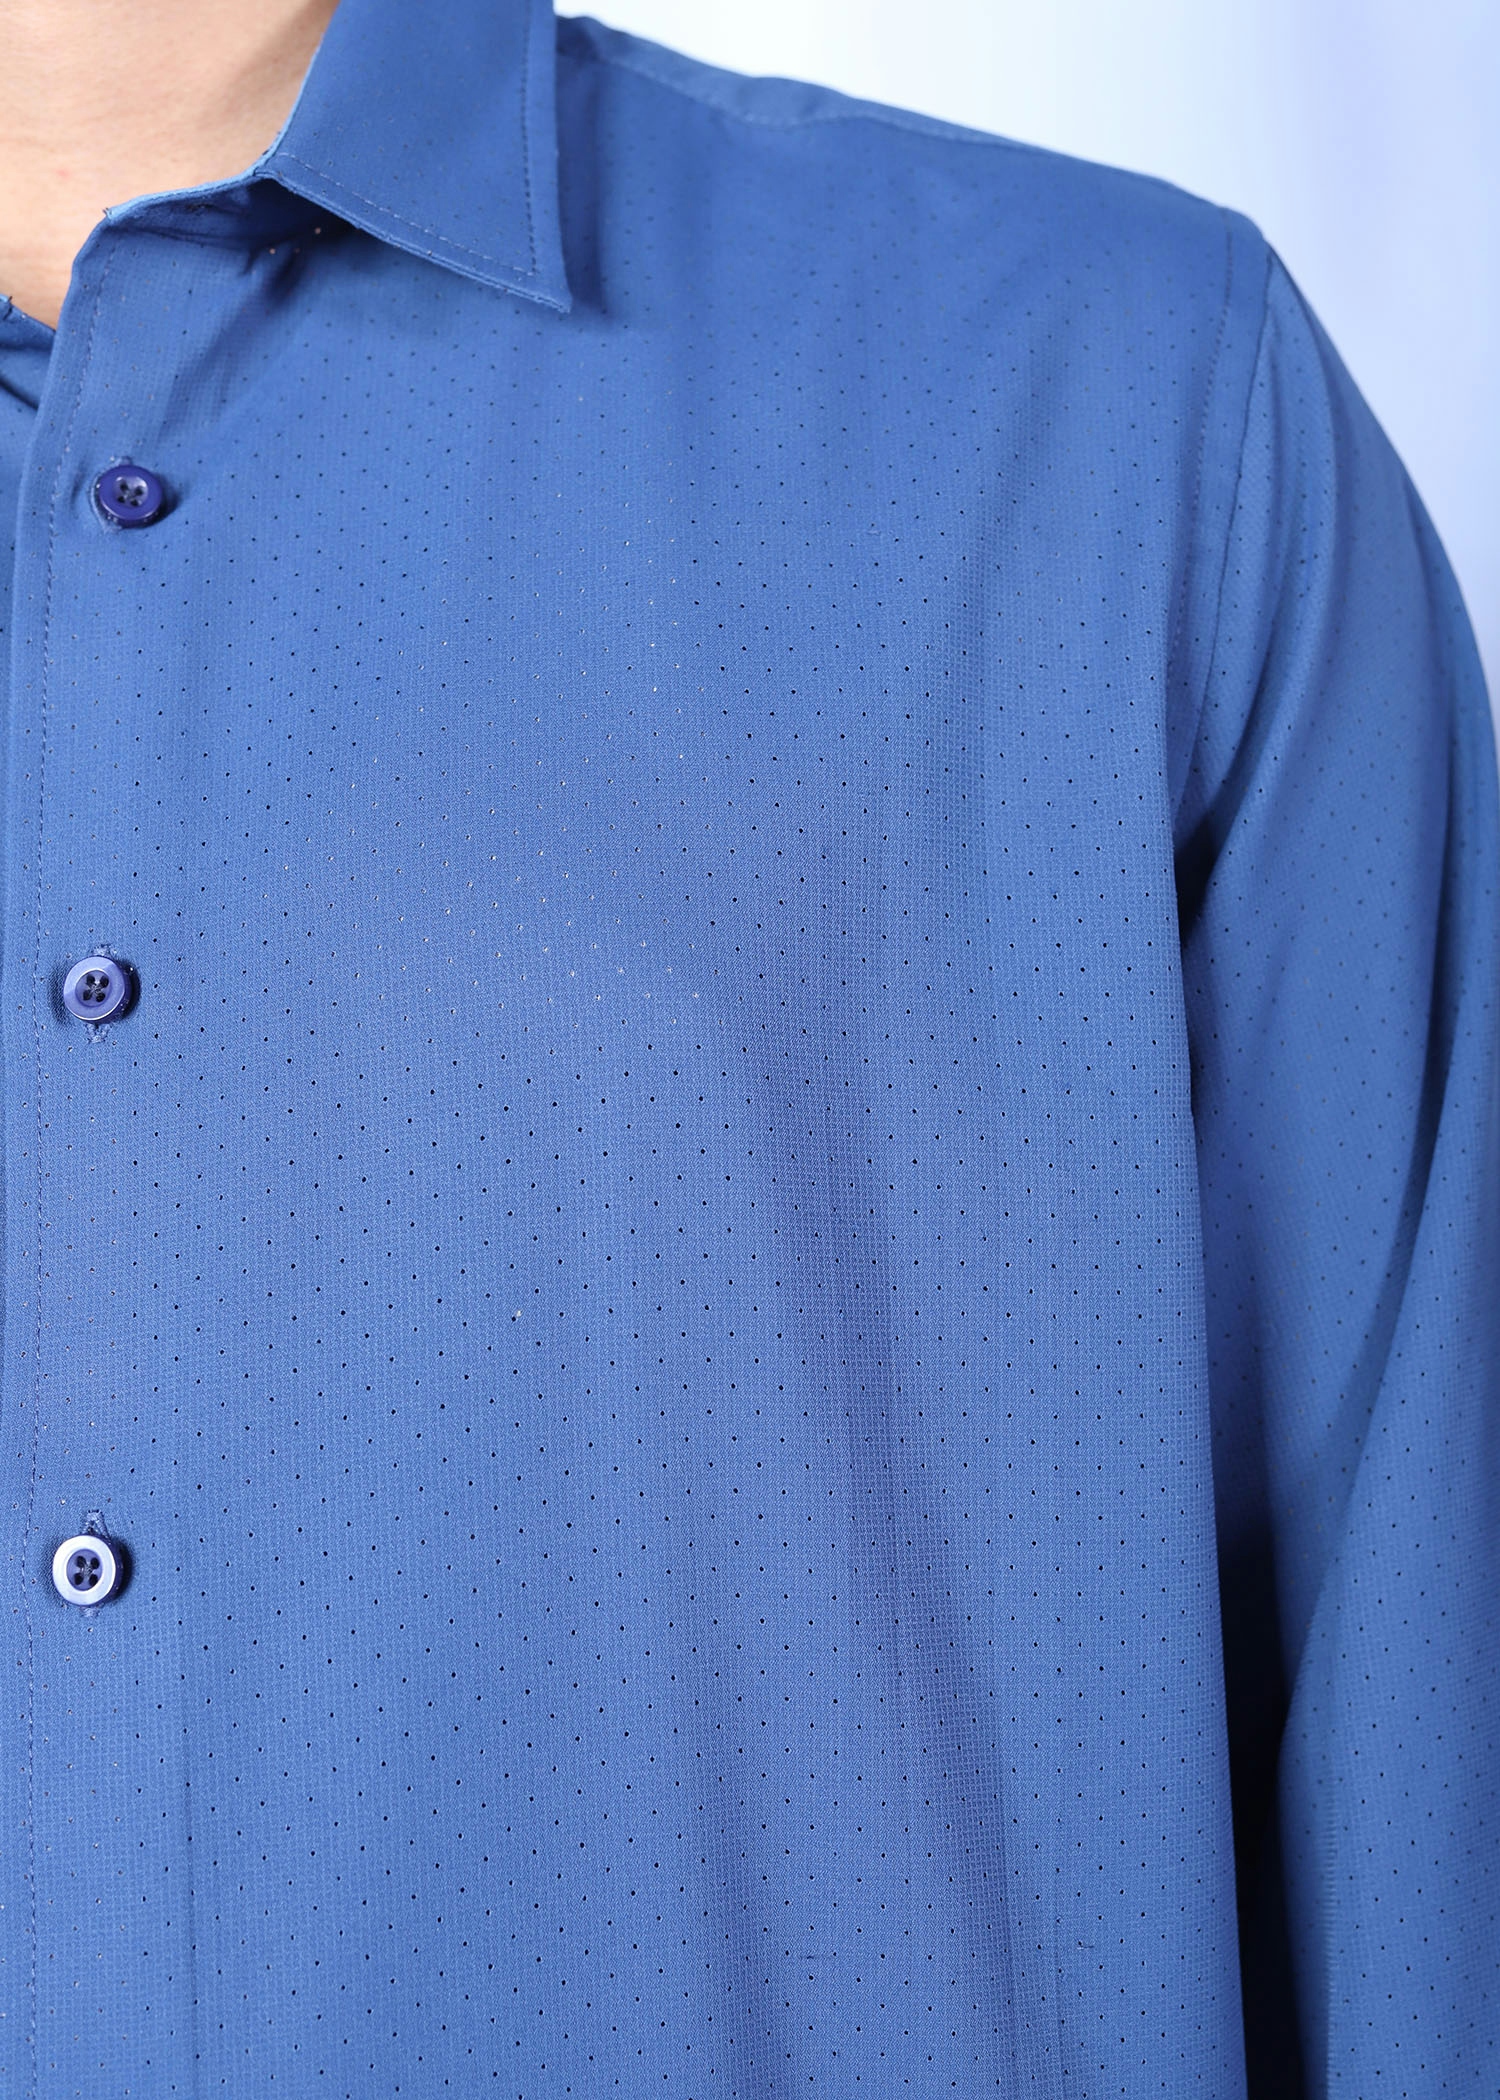 istanbul vi ls shirt navy color close front view